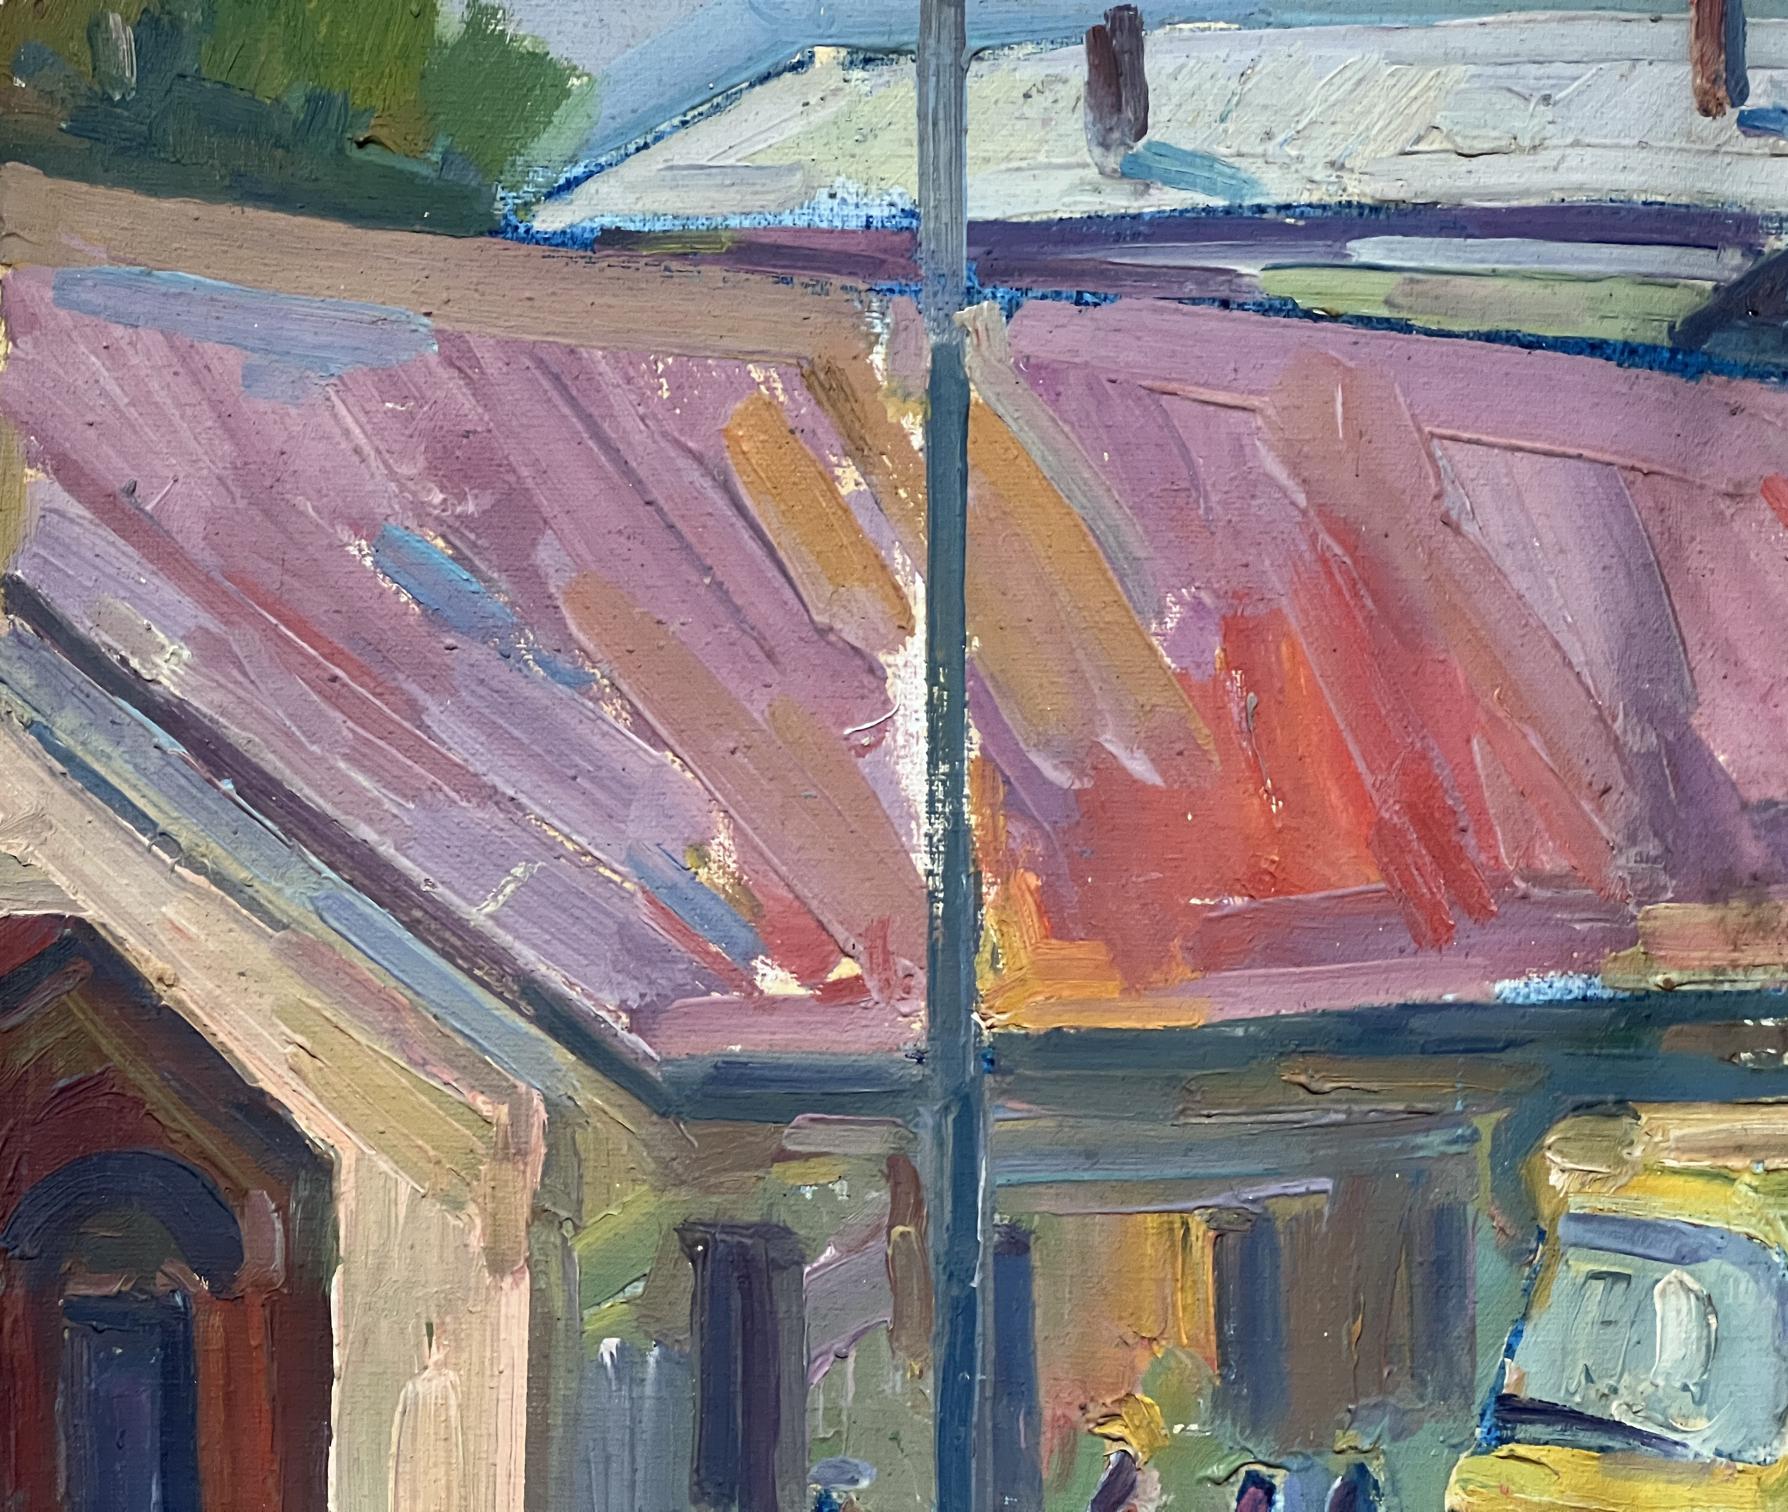 Oil painting by Peter Dobrev: "The Abstractity of Bus Stops"